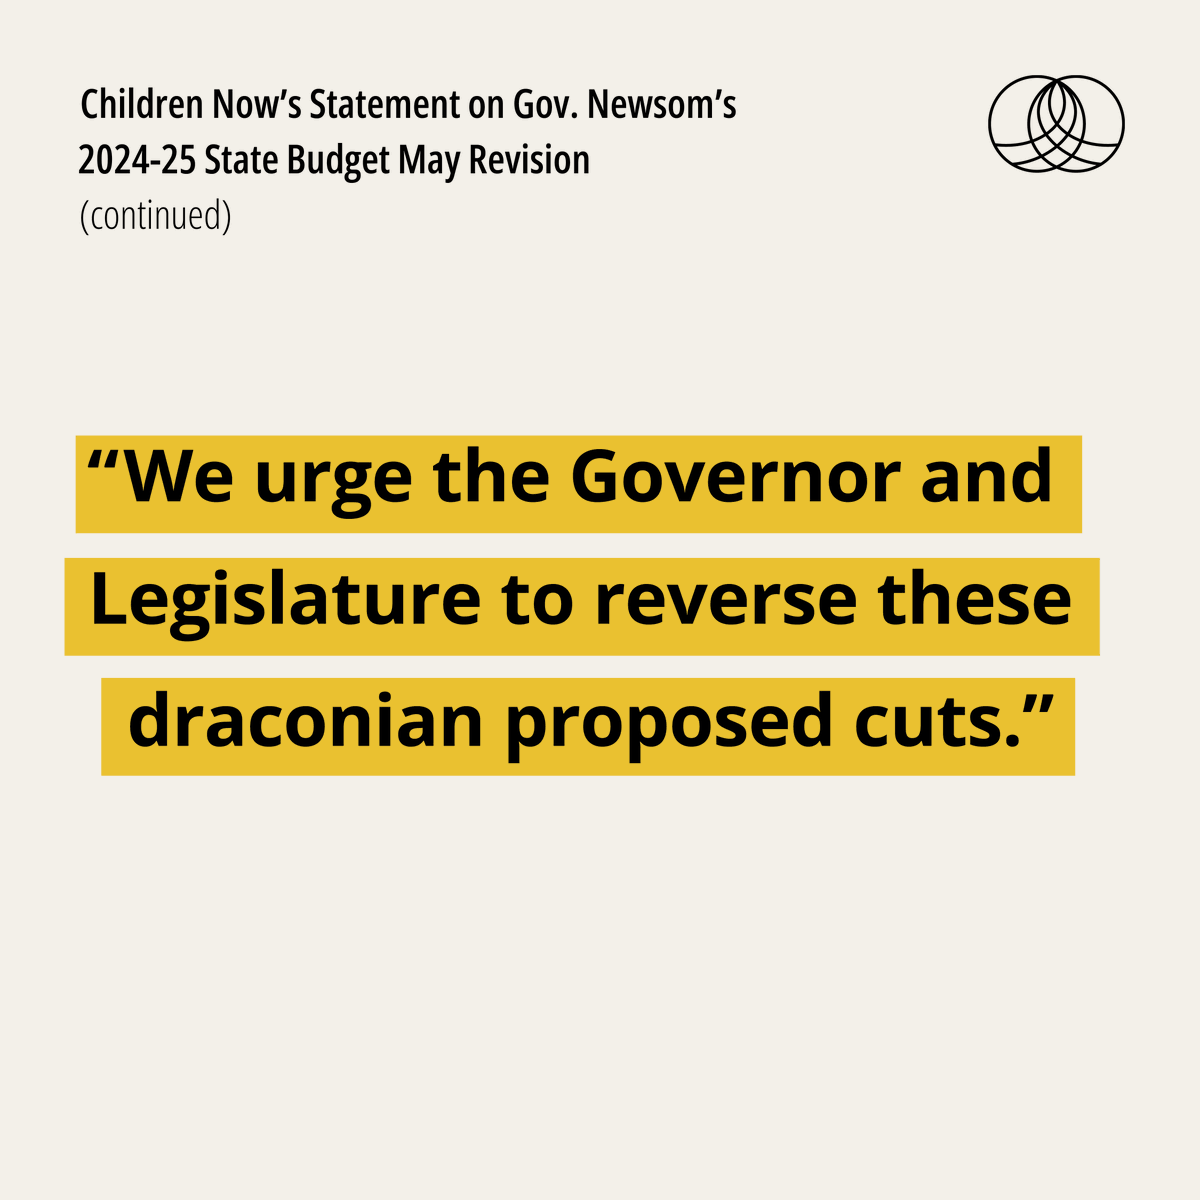 Our Statement on @CAGovernor's State Budget May Revision. #ProtectFURS #CABudget #DontCutFromKids